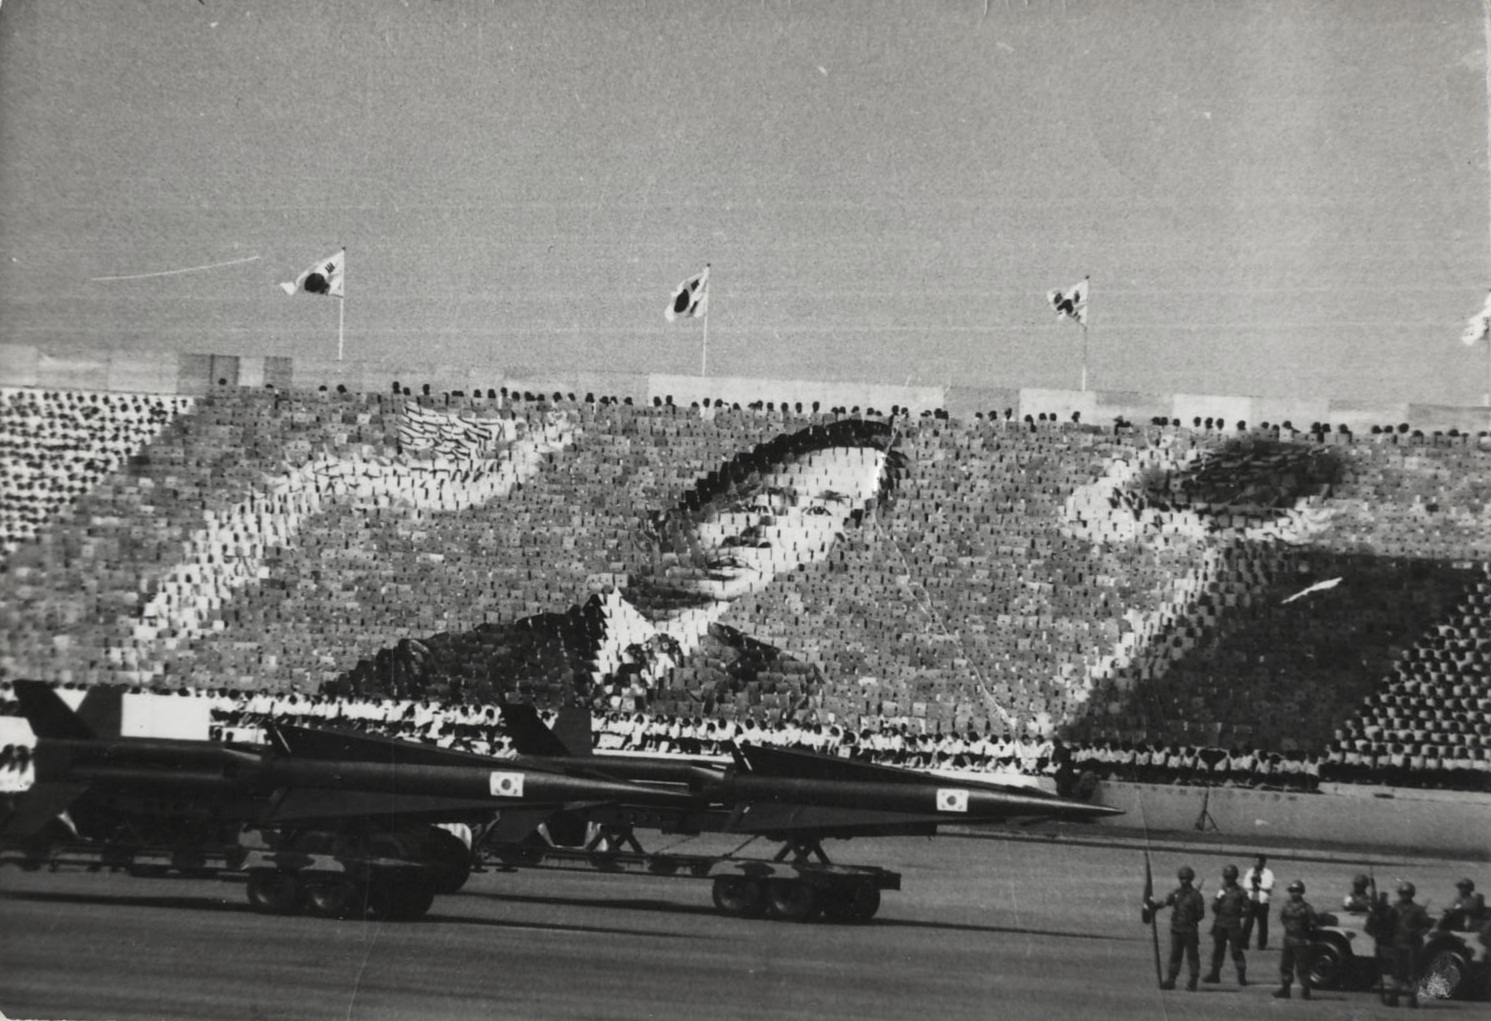 A large card stunt to honor South Korean President Park Chung-hee at Armed Forces Day, 1973.